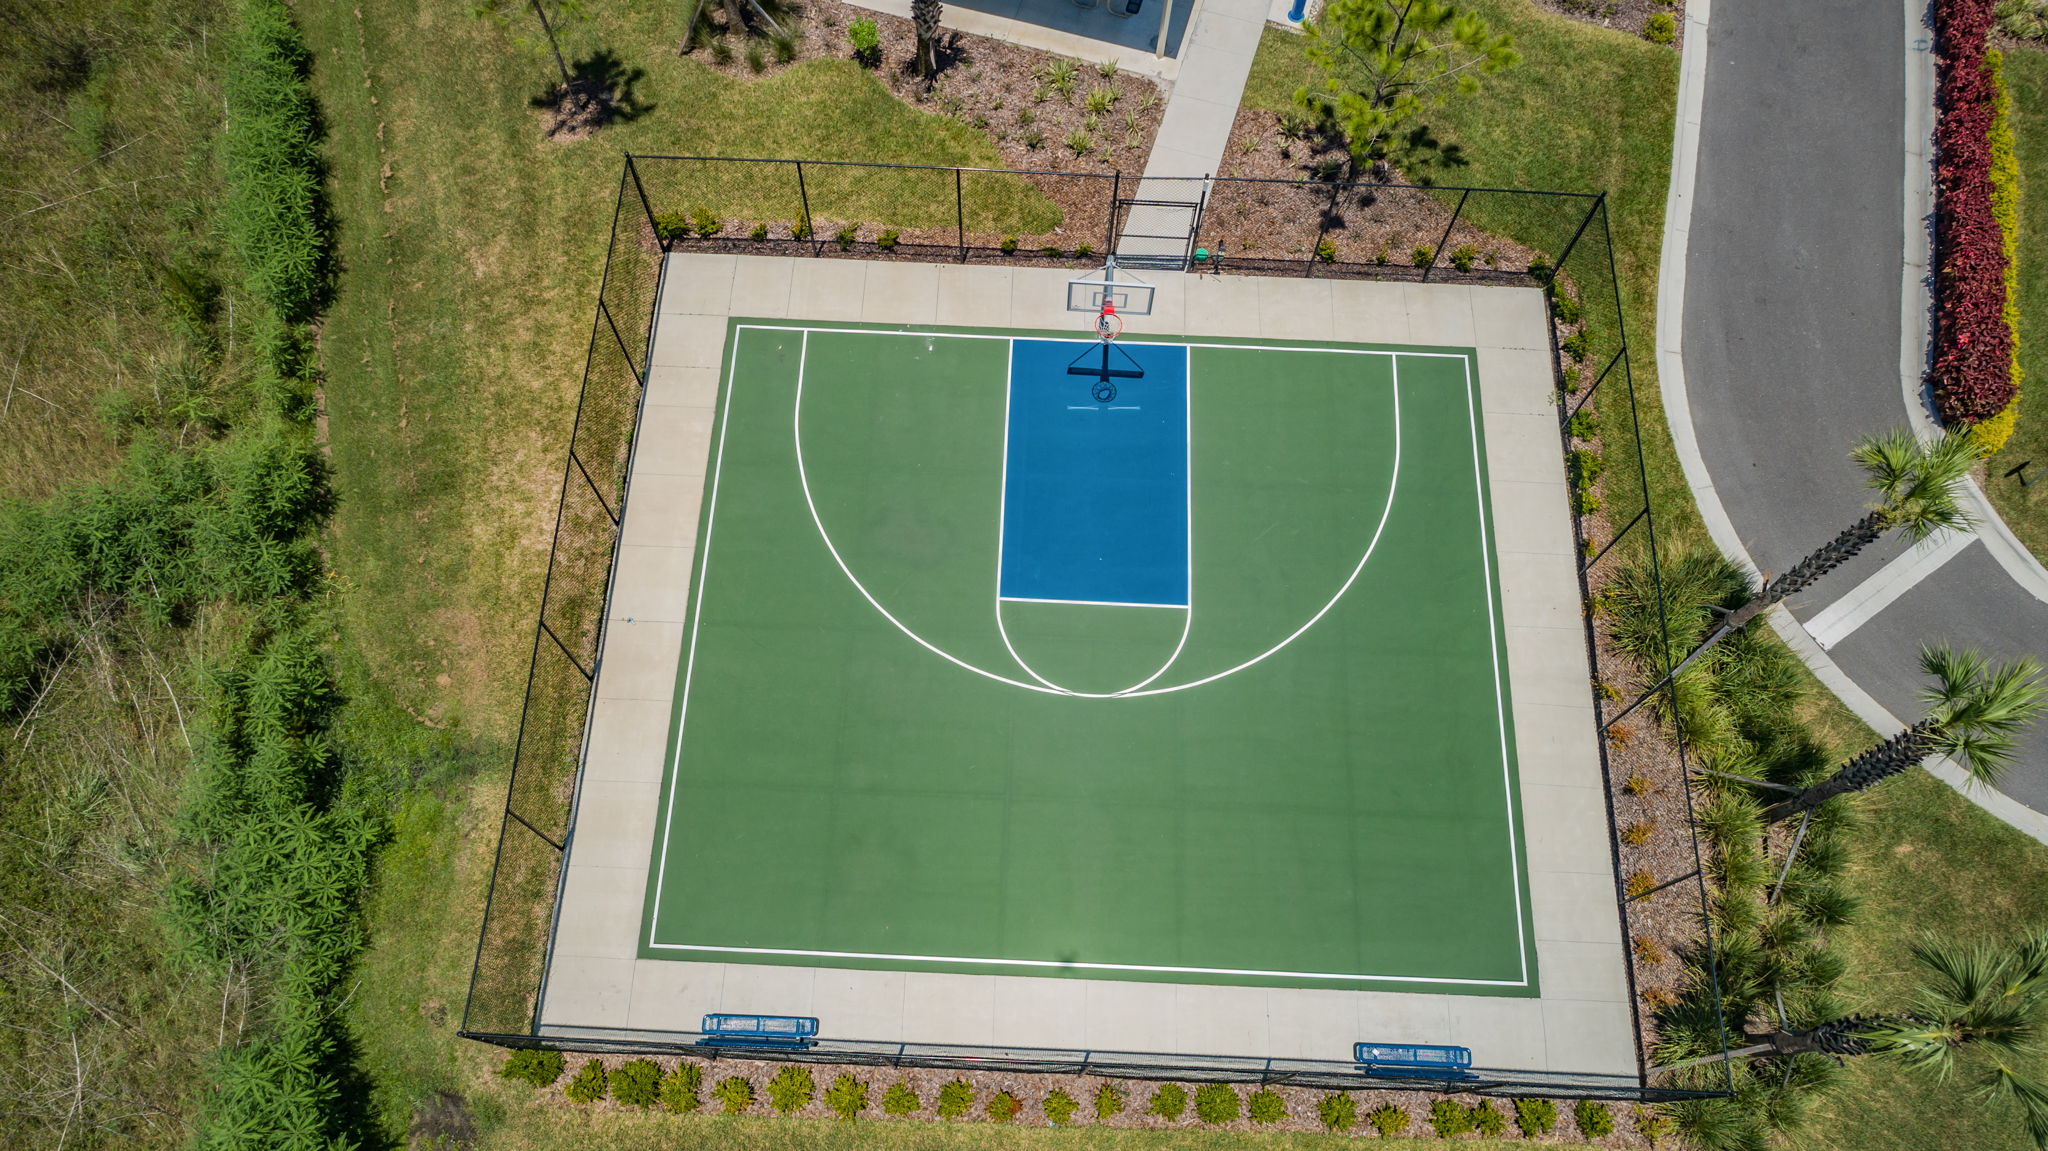 35-The Preserve Basketball Court